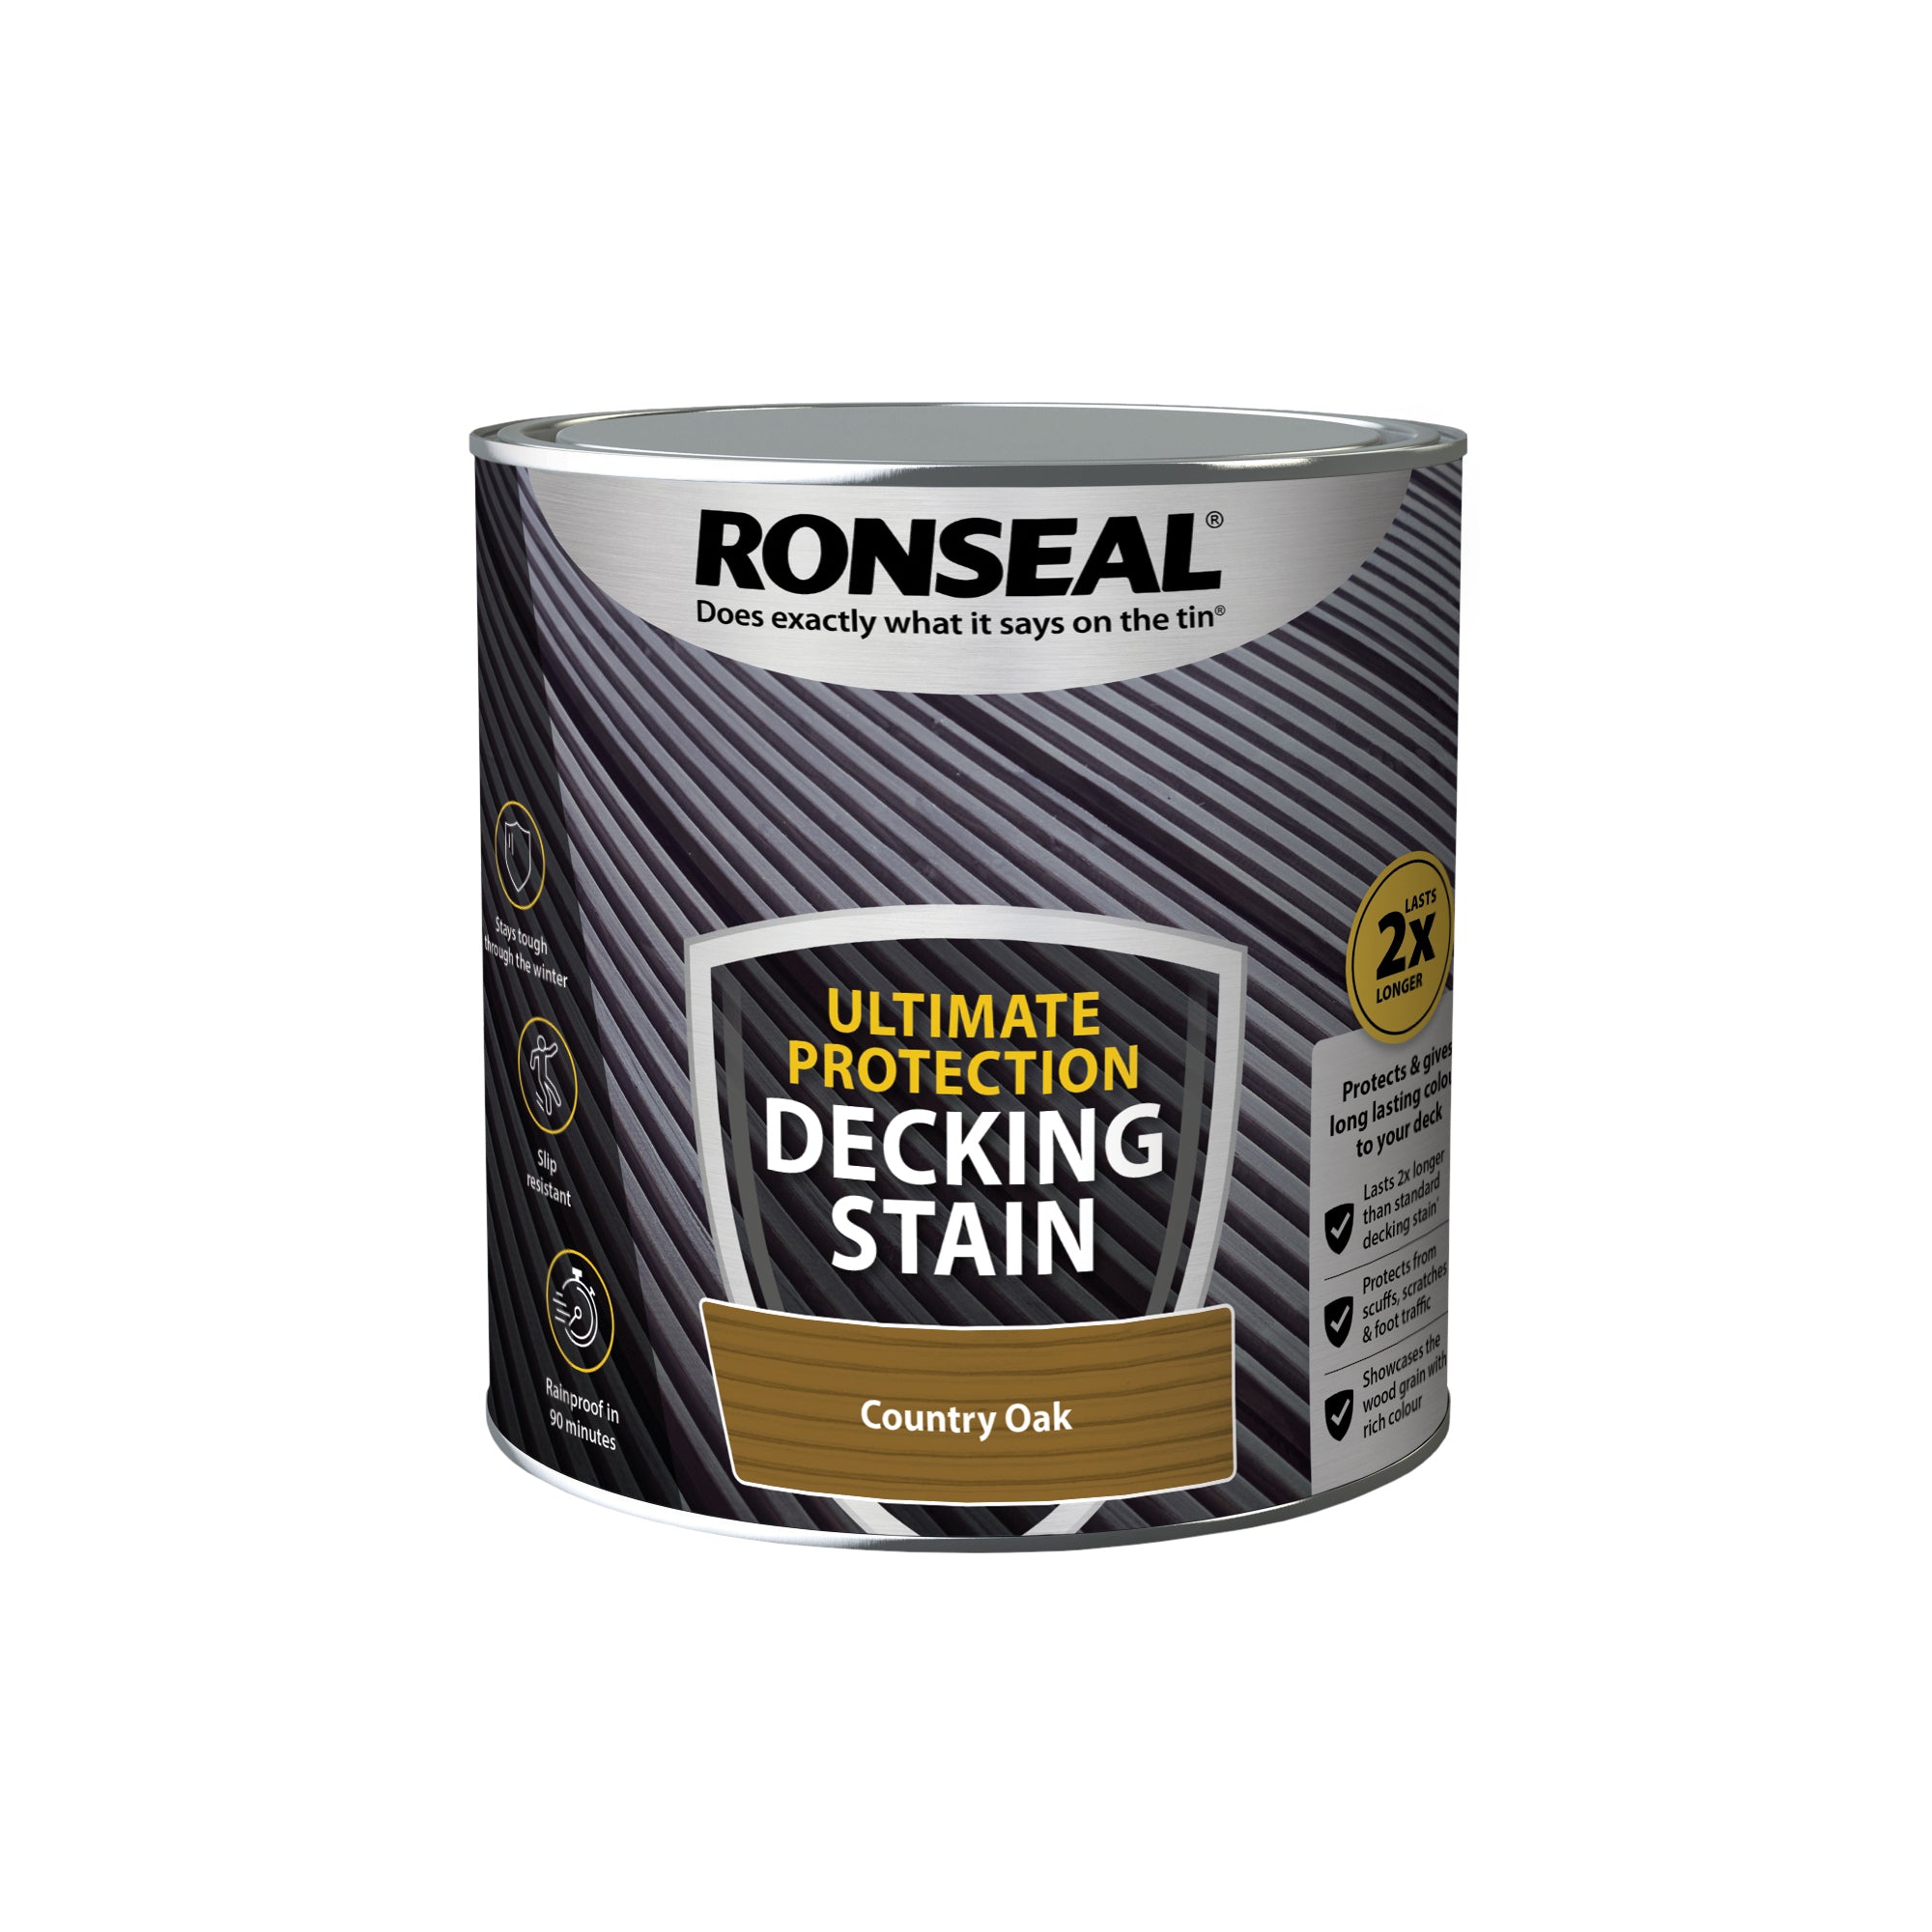 Ronseal-Ultimate-Protection-Decking-Stain-Country-Oak-2.5L